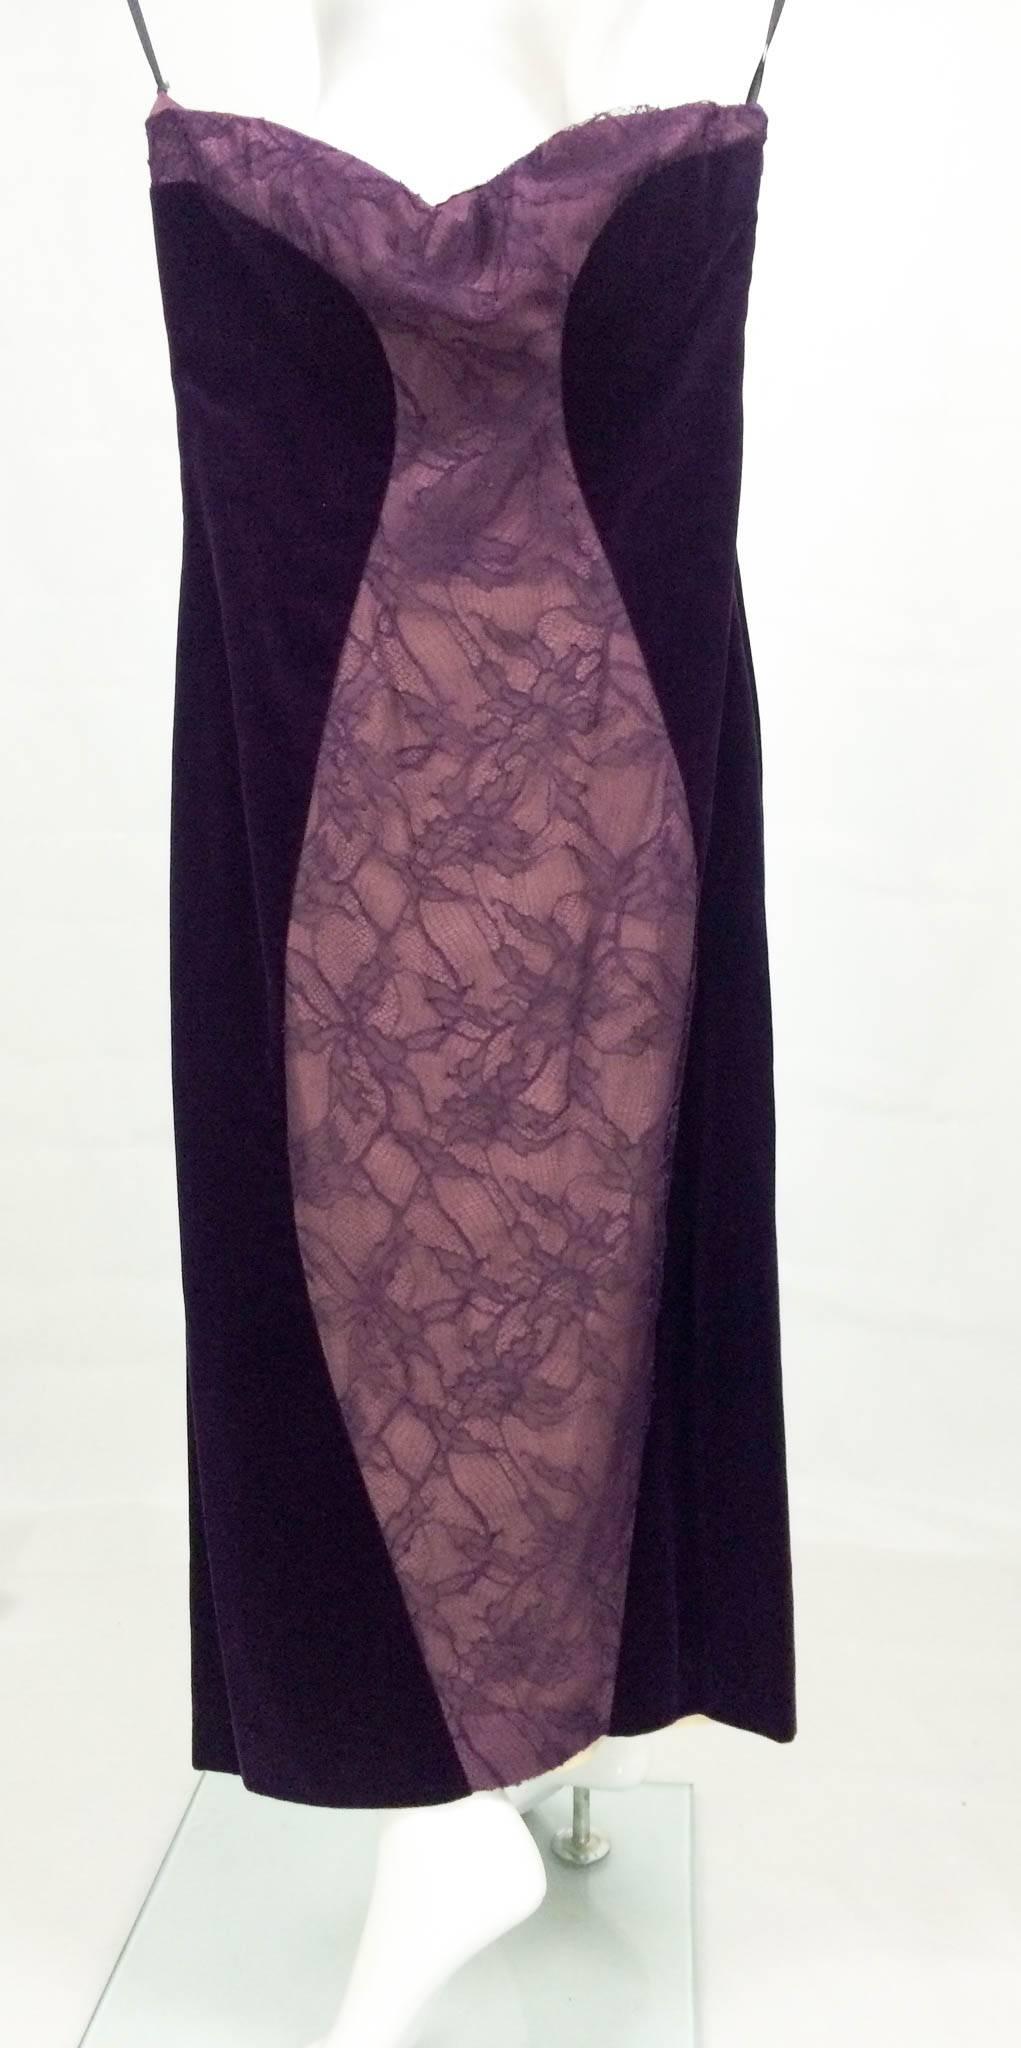 Paco Rabanne Velvet and Lace Dress - 1970s For Sale 1